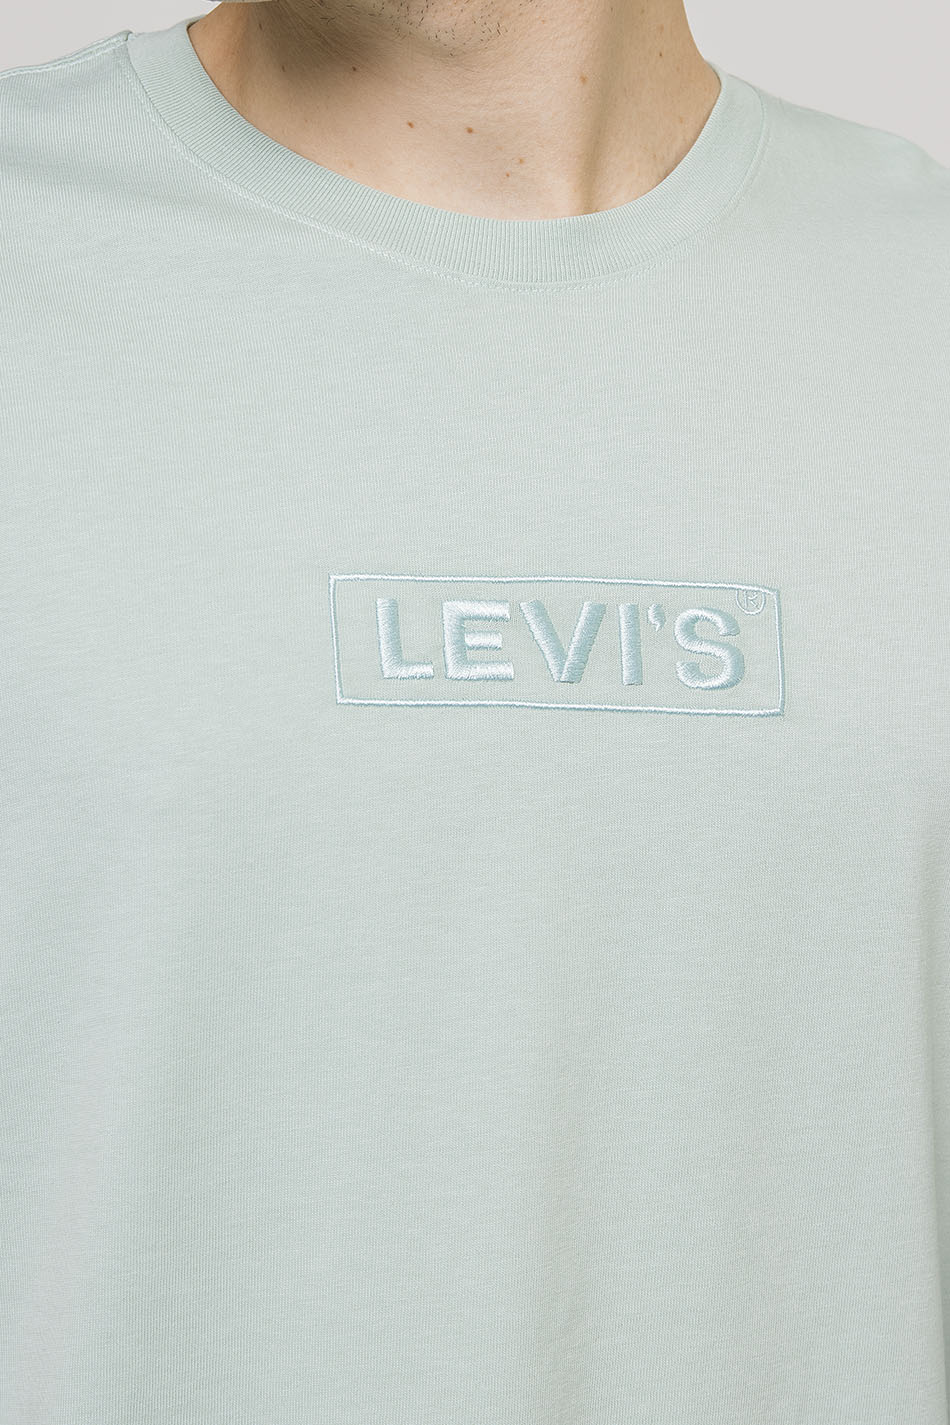 Levi’s Relaxed Fit T-Shirt